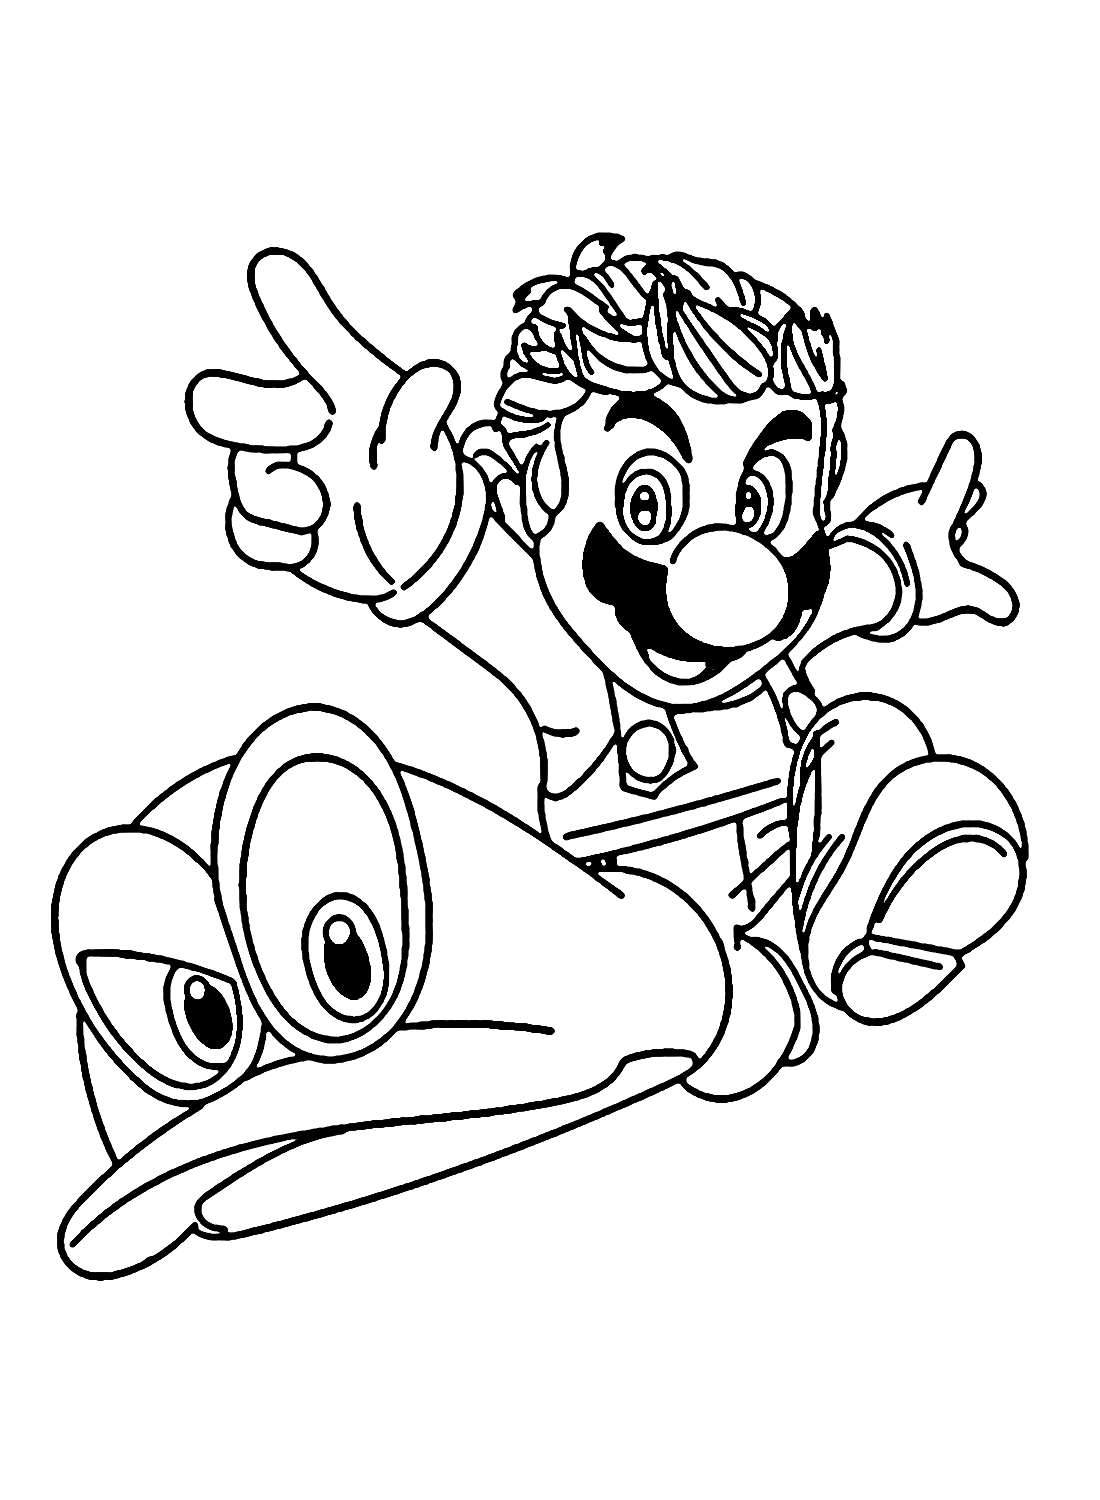 Mario with Cappy Images Coloring Pages